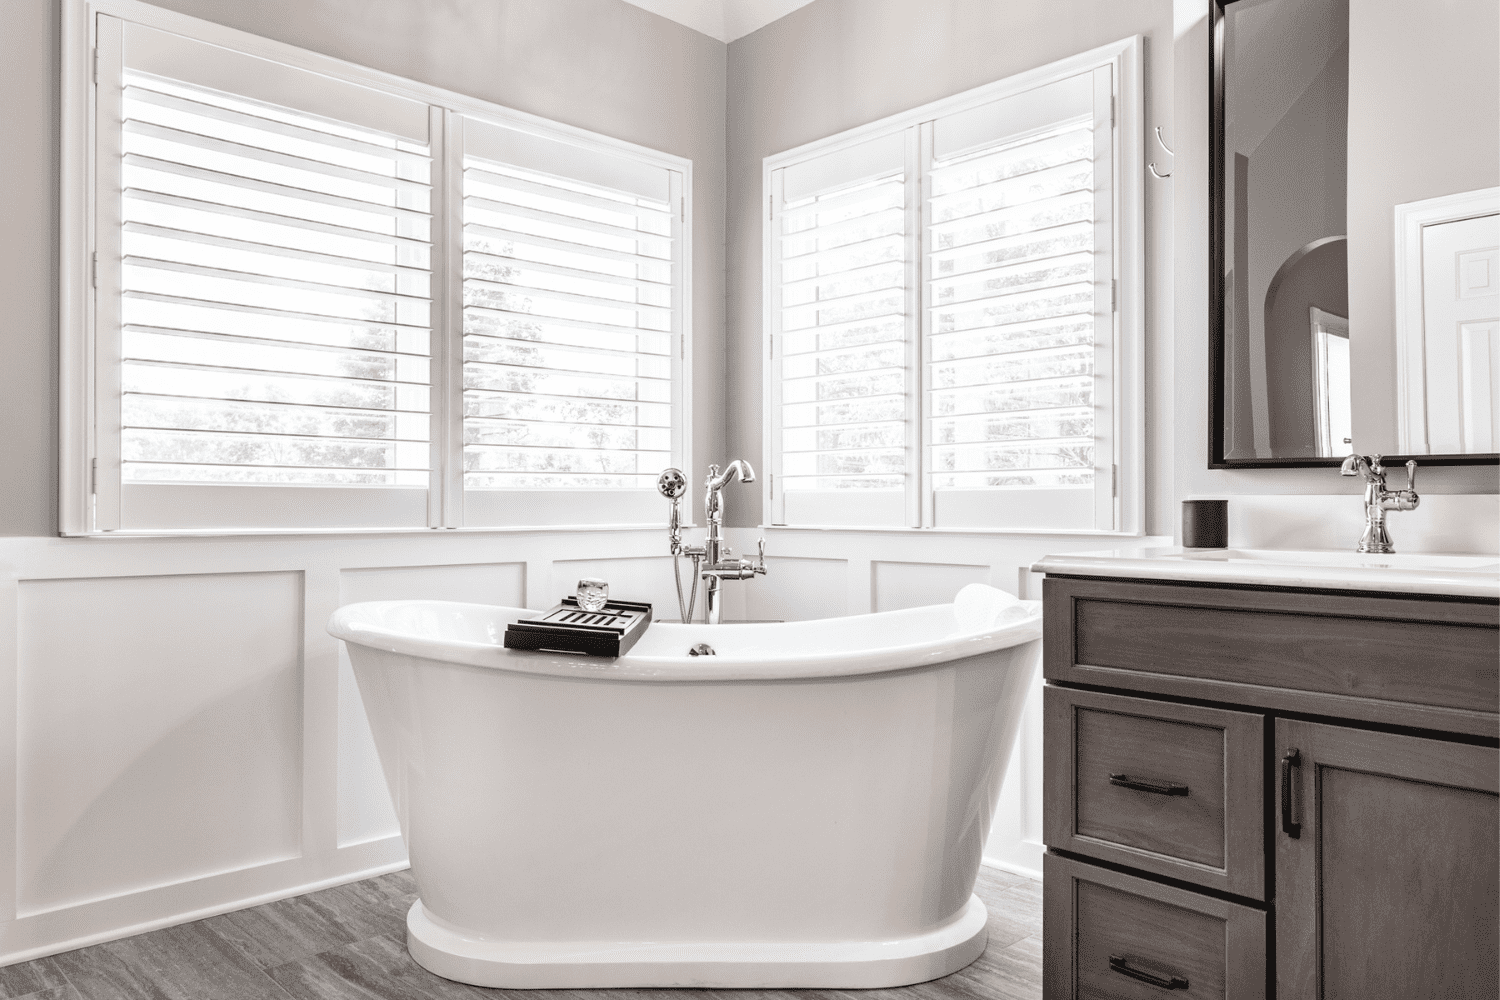 Nicholas Design Build | A white bathroom with wooden floors and white shutters, perfect for a master bath remodel.